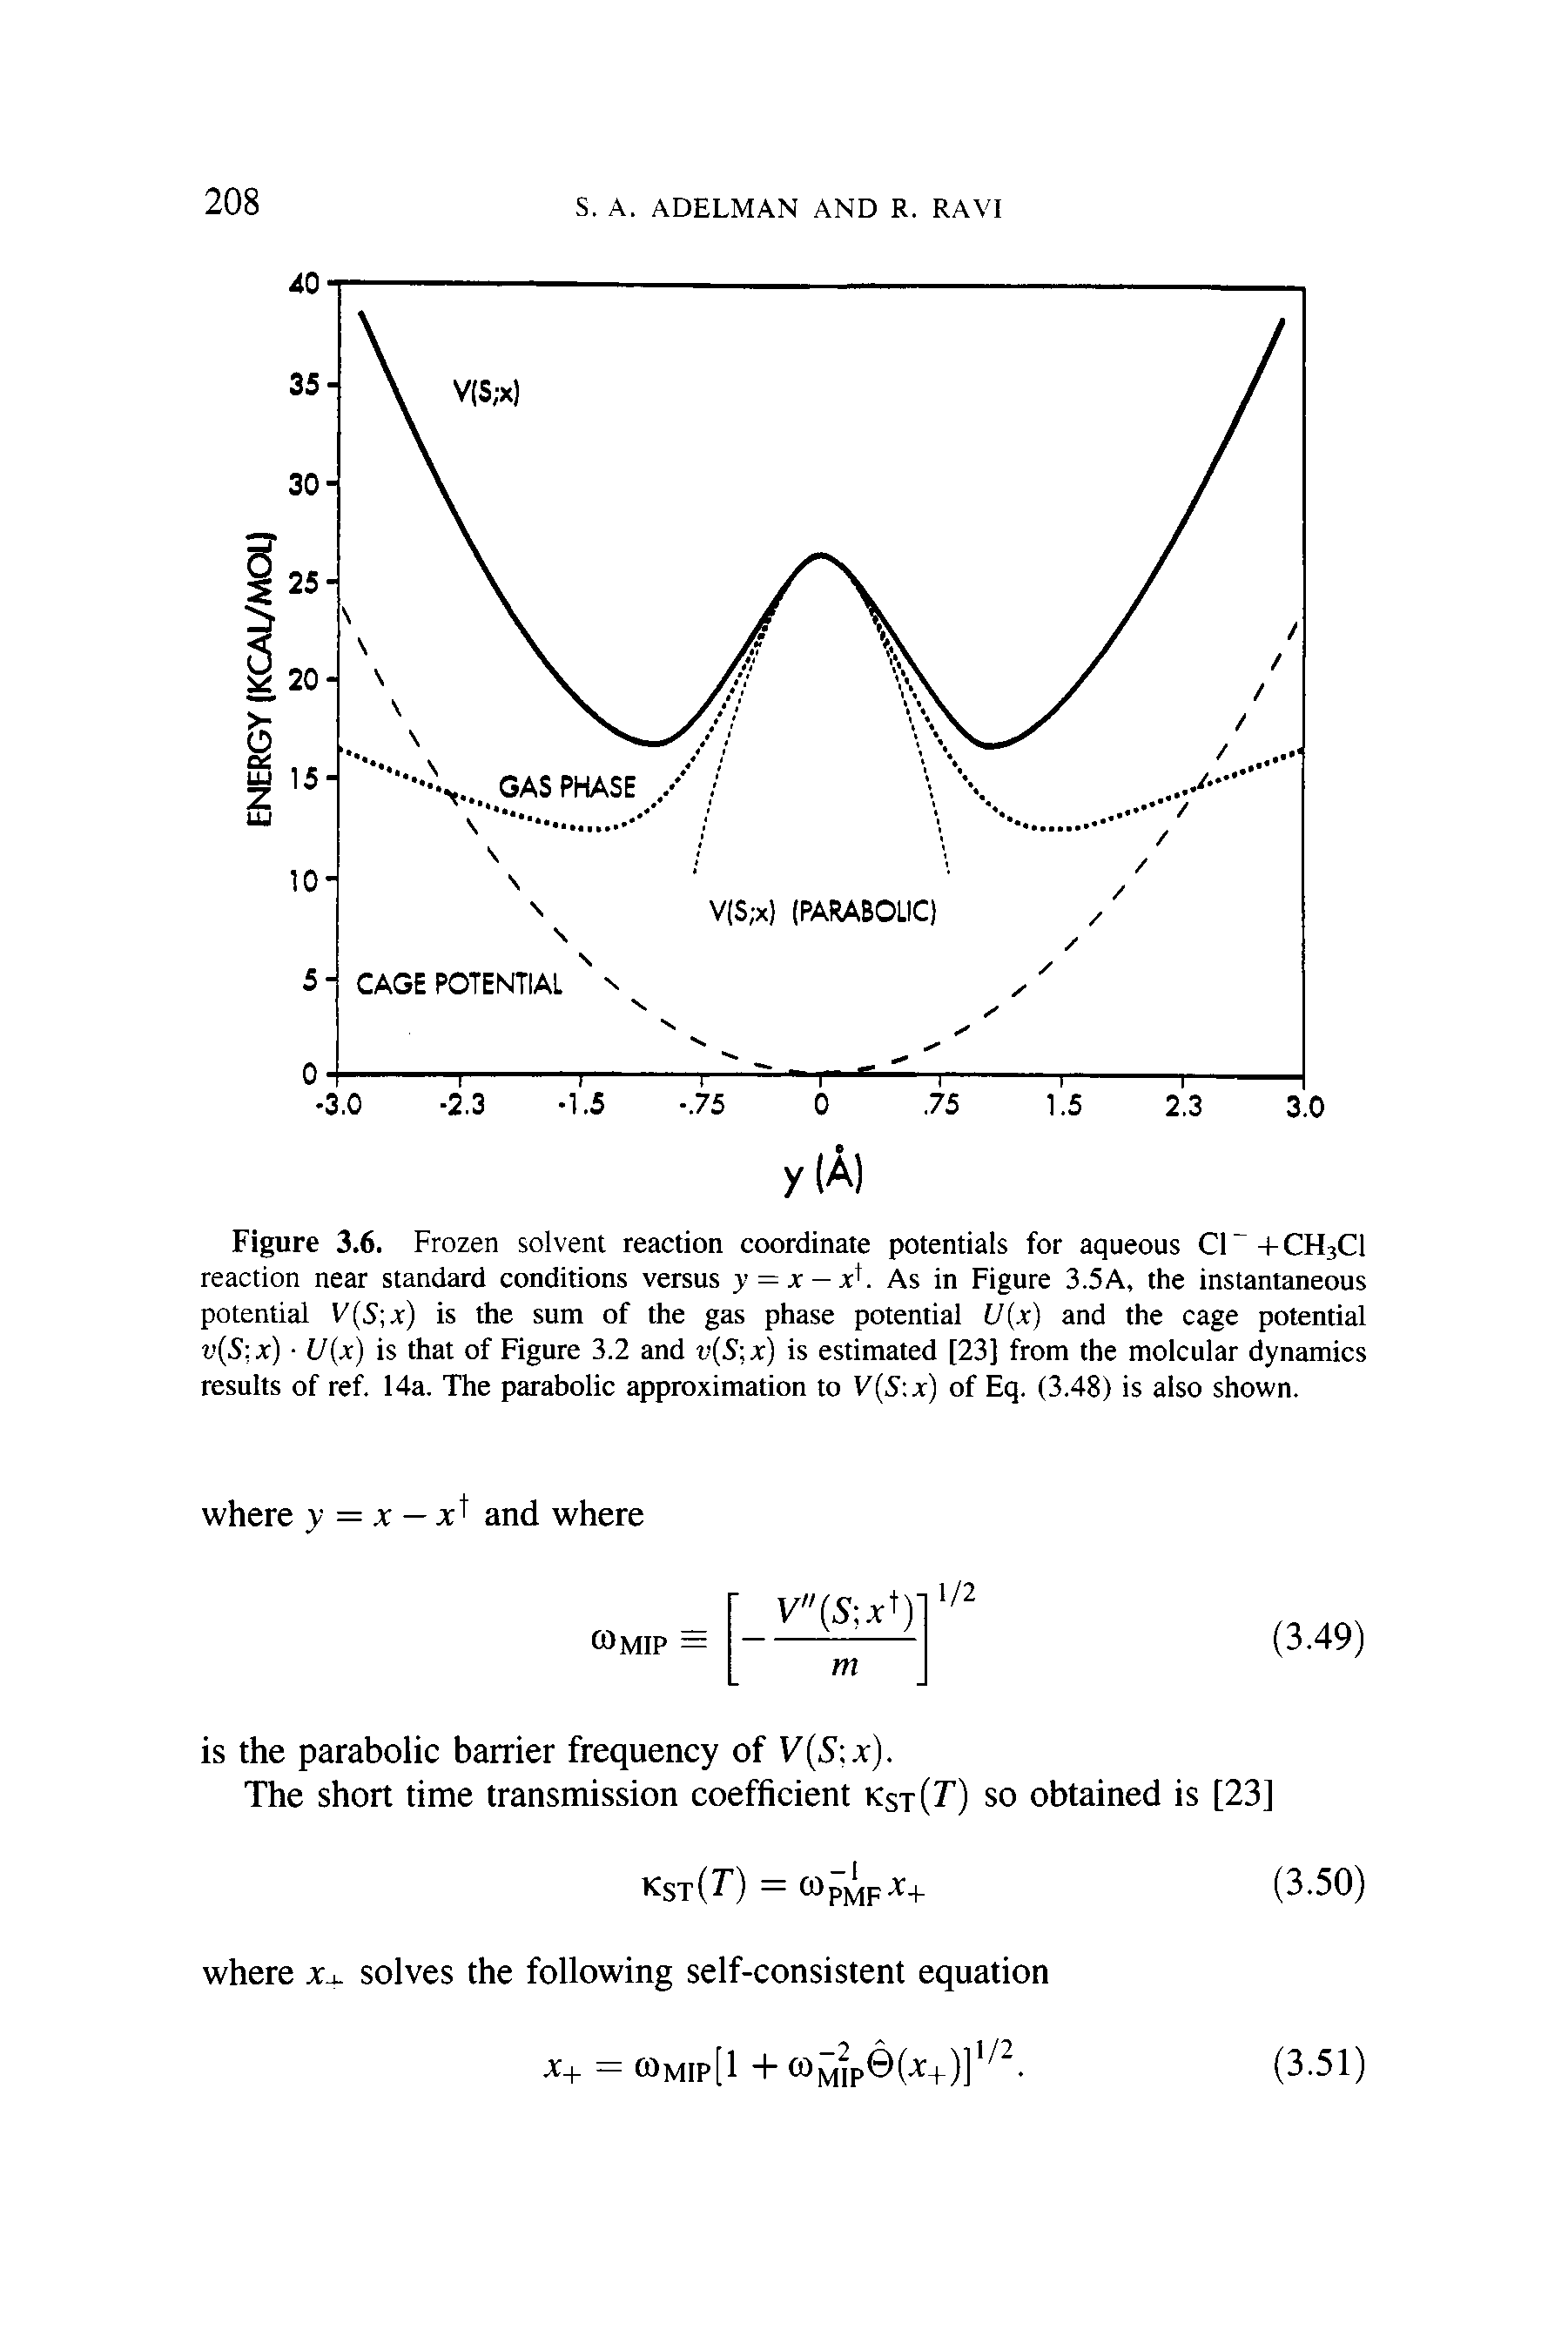 Figure 3.6. Frozen solvent reaction coordinate potentials for aqueous C1 +CH3C1 reaction near standard conditions versus y = x — xK As in Figure 3.5A, the instantaneous potential V(S, x) is the sum of the gas phase potential U x) and the cage potential v S x) U x) is that of Figure 3.2 and v S x) is estimated [23] from the molcular dynamics results of ref. 14a. The parabolic approximation to V S x) of Eq. (3.48) is also shown.